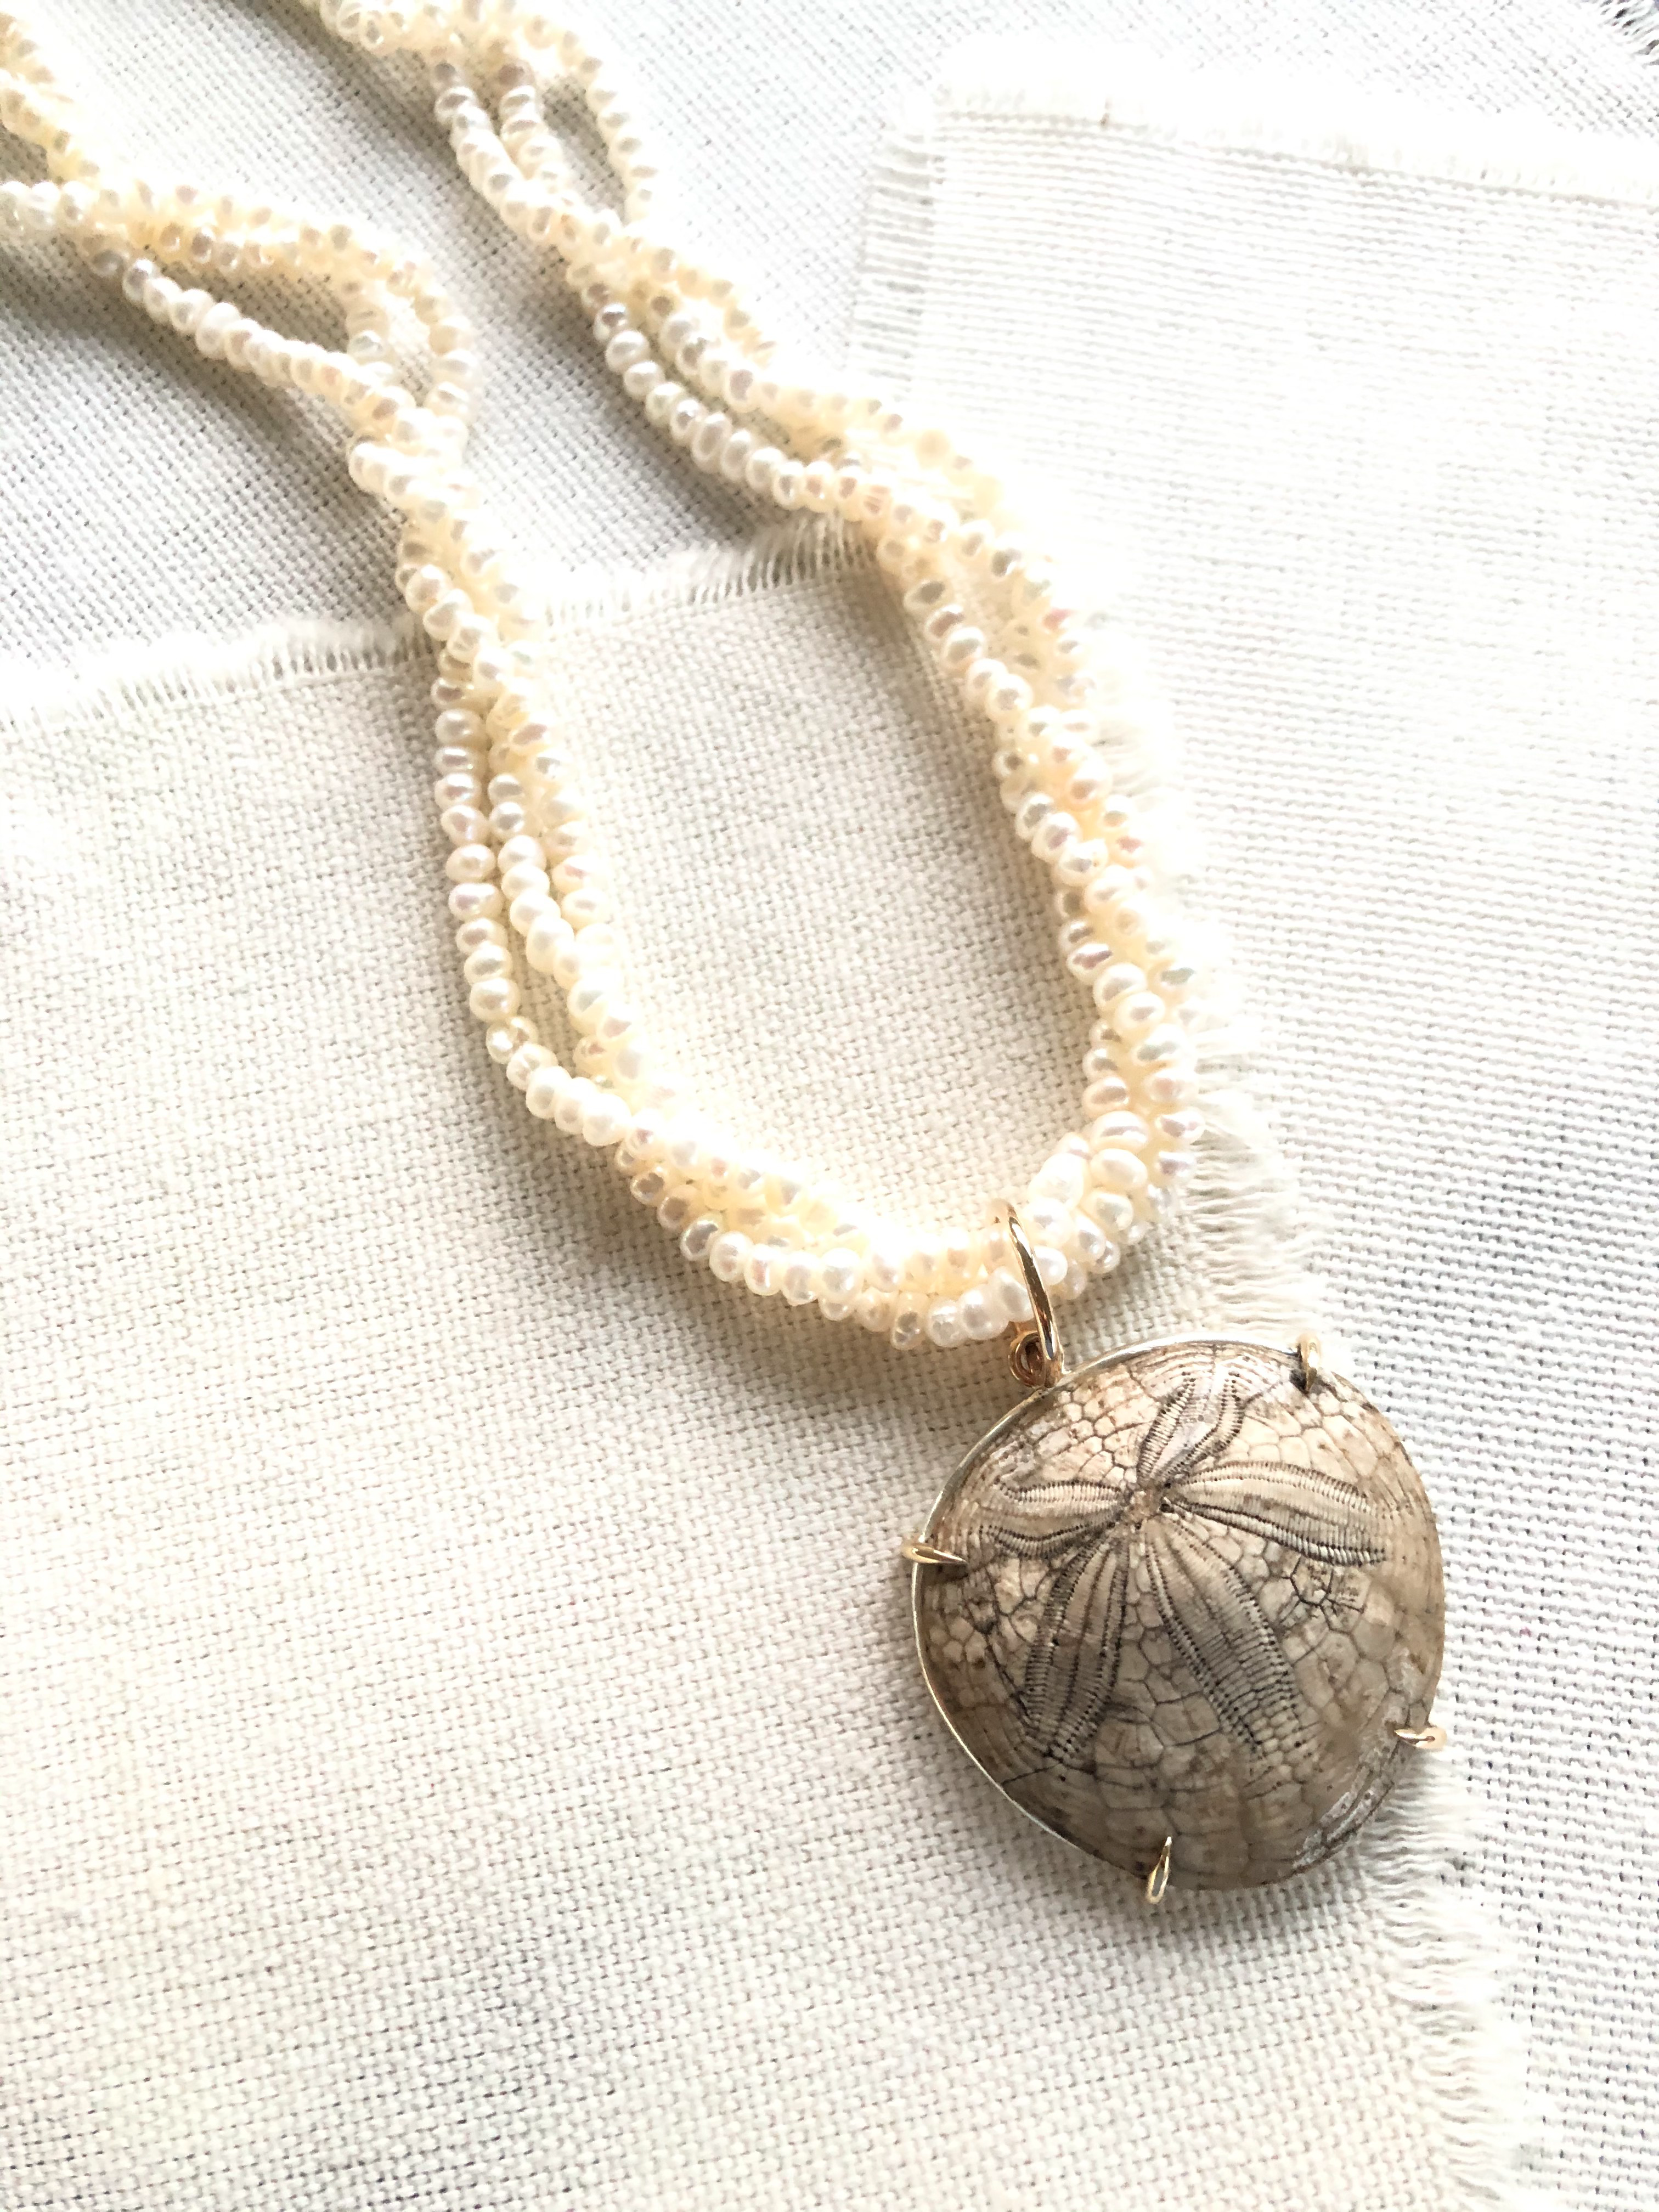 This is a one of a kind artisan made fossilized sand dollar on seed pearls necklace.